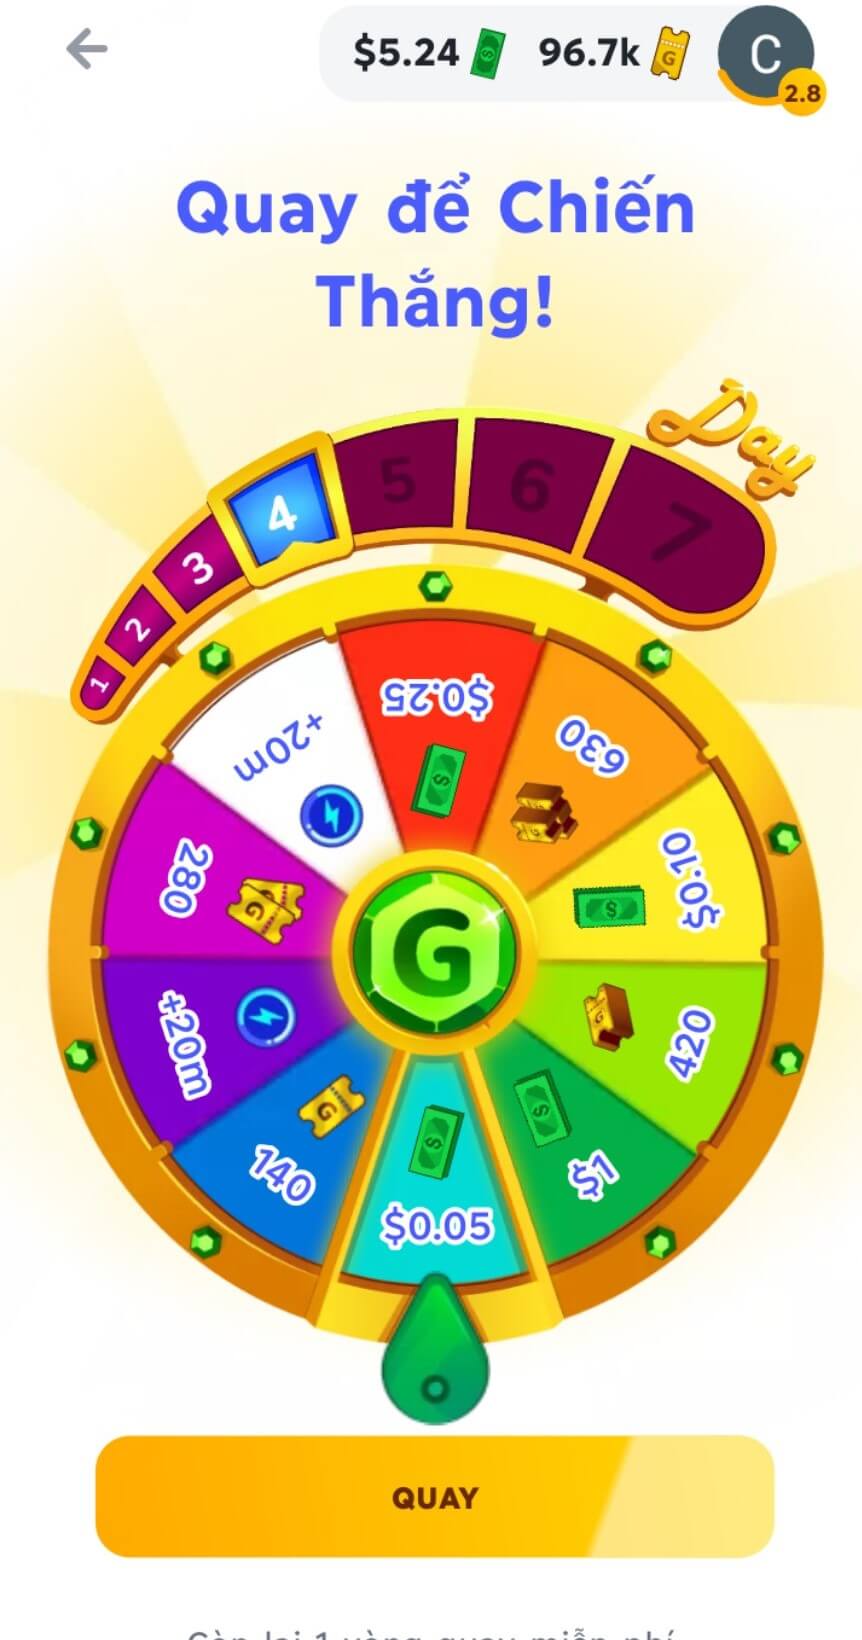 vòng xoay may mắn trong gamee prizes